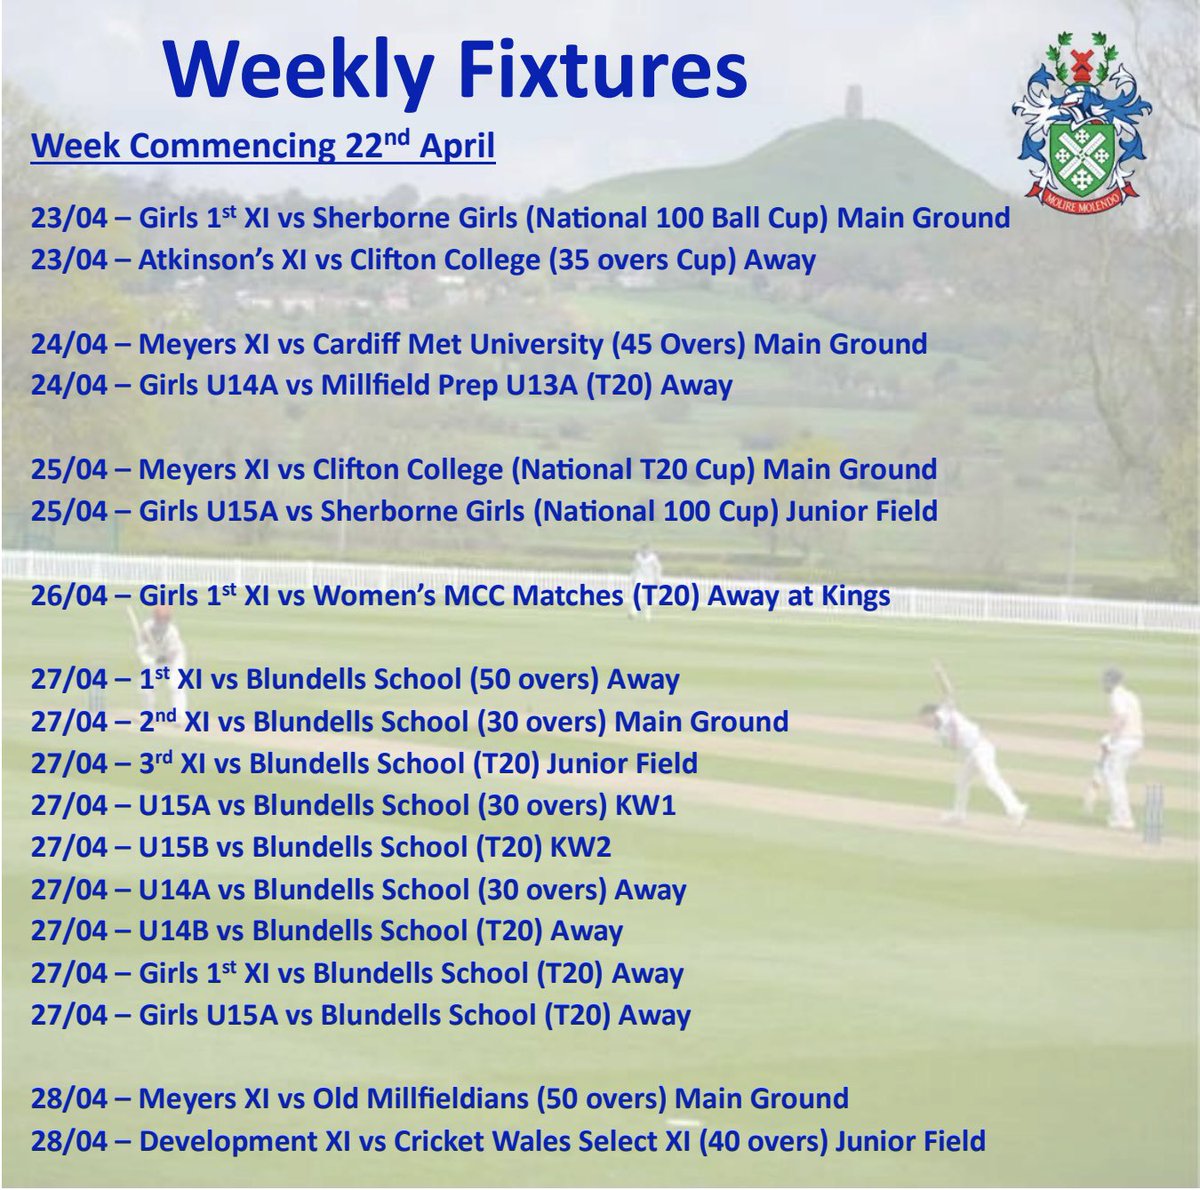 Cricket is back at Millfield🏏👌 Here are our fixutures throughout the first week of term with 4 national cup competitions and a block fixture against Blundells on Saturday. Cannot wait to get started🏏